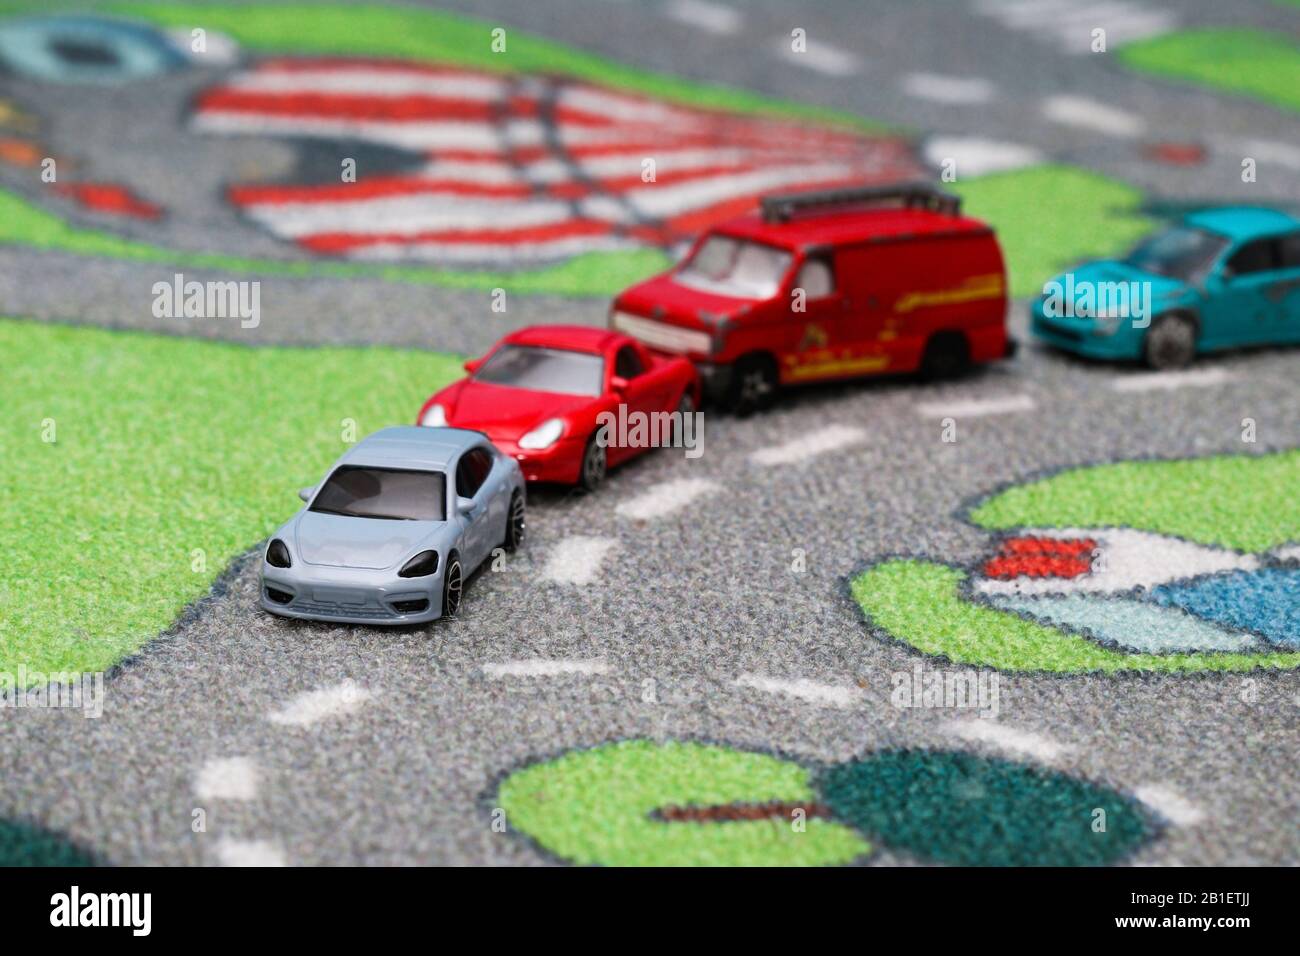 Toy car traffic jam in front of roundabout on car town carpet street Stock Photo